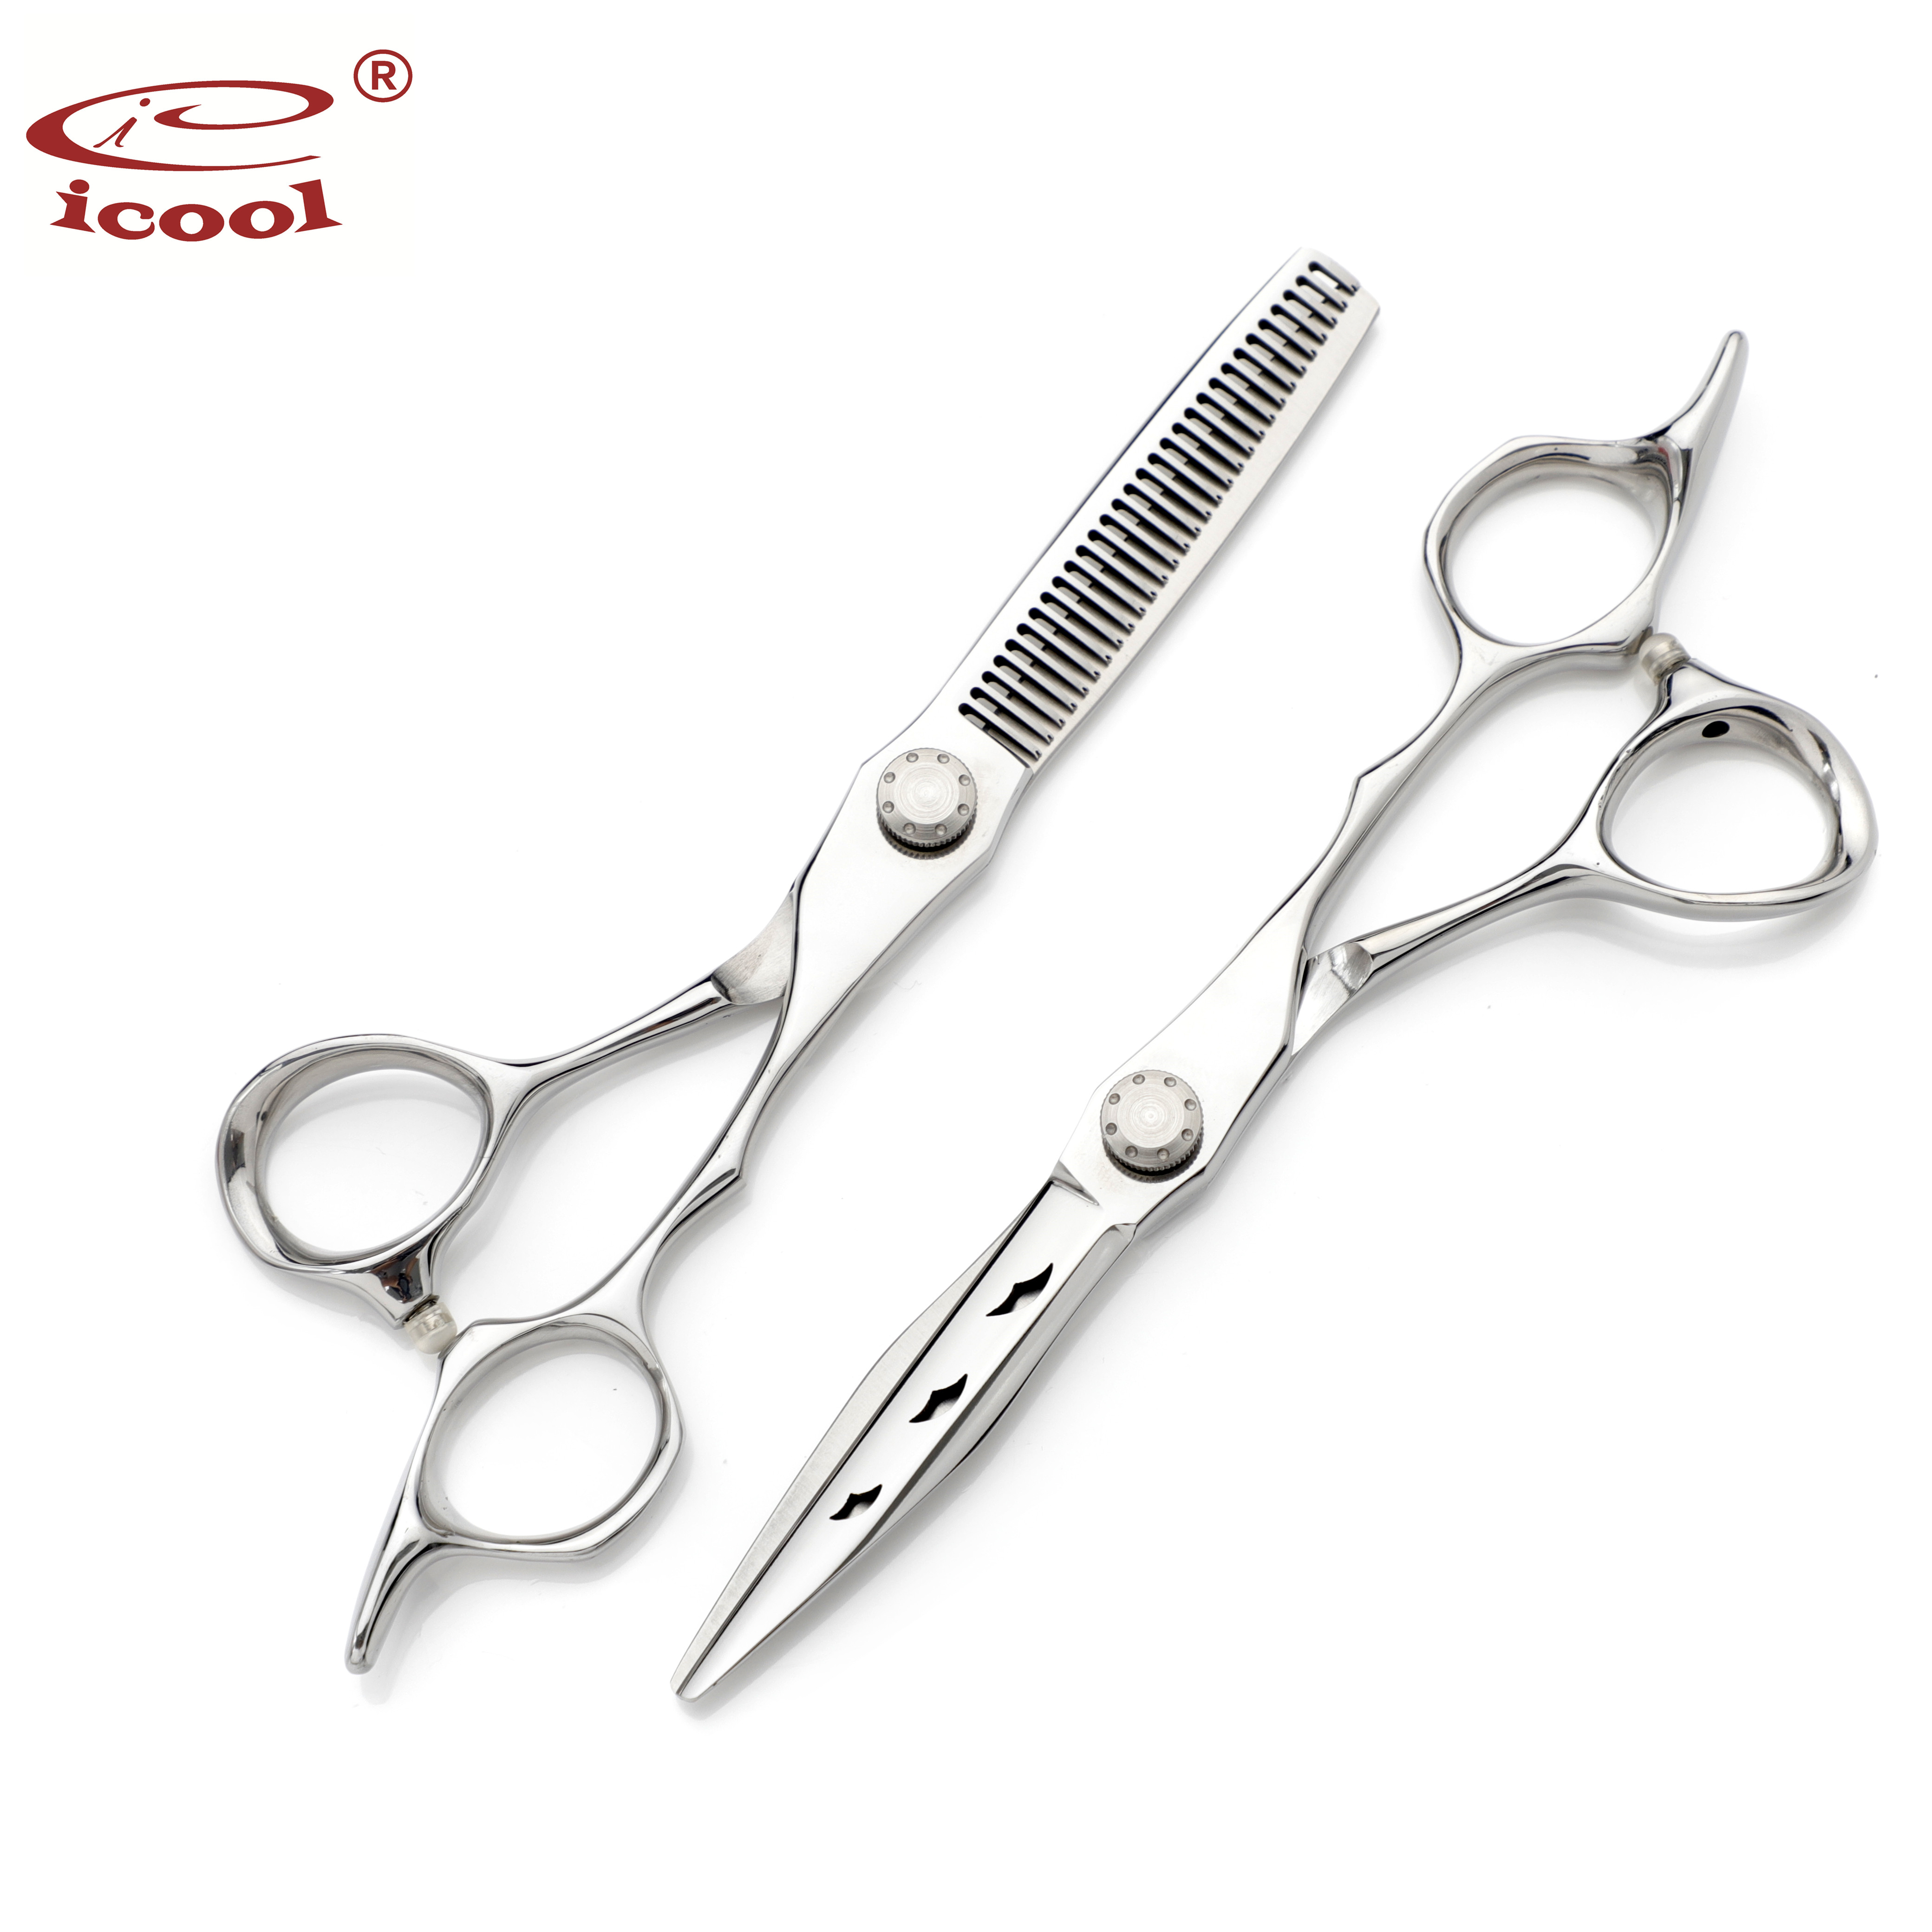 How to use high-quality hairdressing scissors？